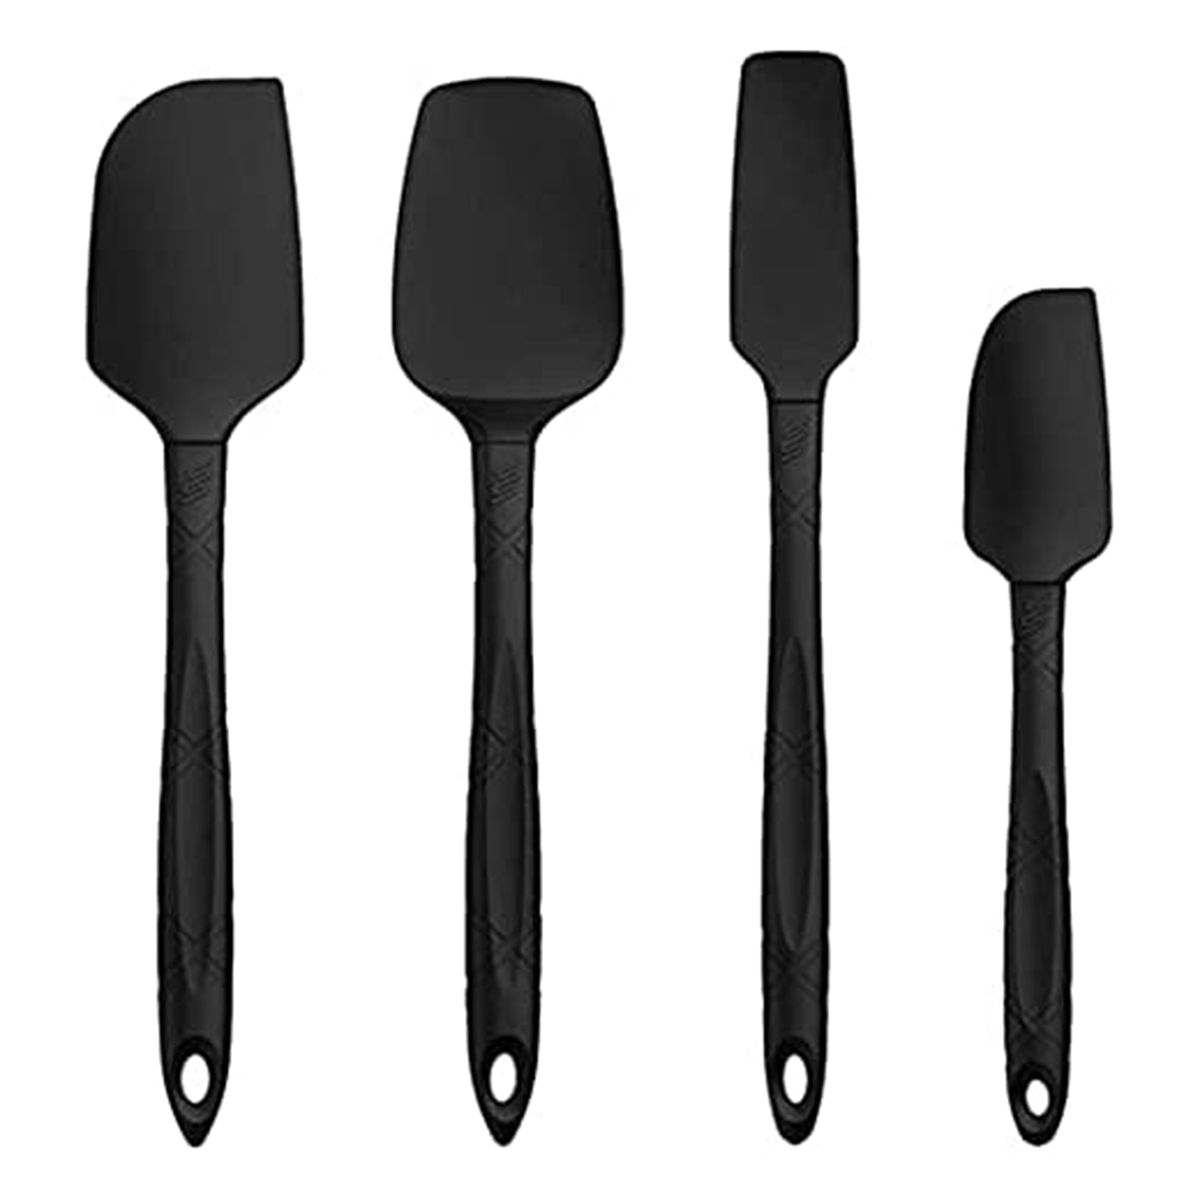 M KITCHEN WORLD Silicone Spatula Set 4 Piece Heat Resistant Rubber Spatulas for Cooking and Baking